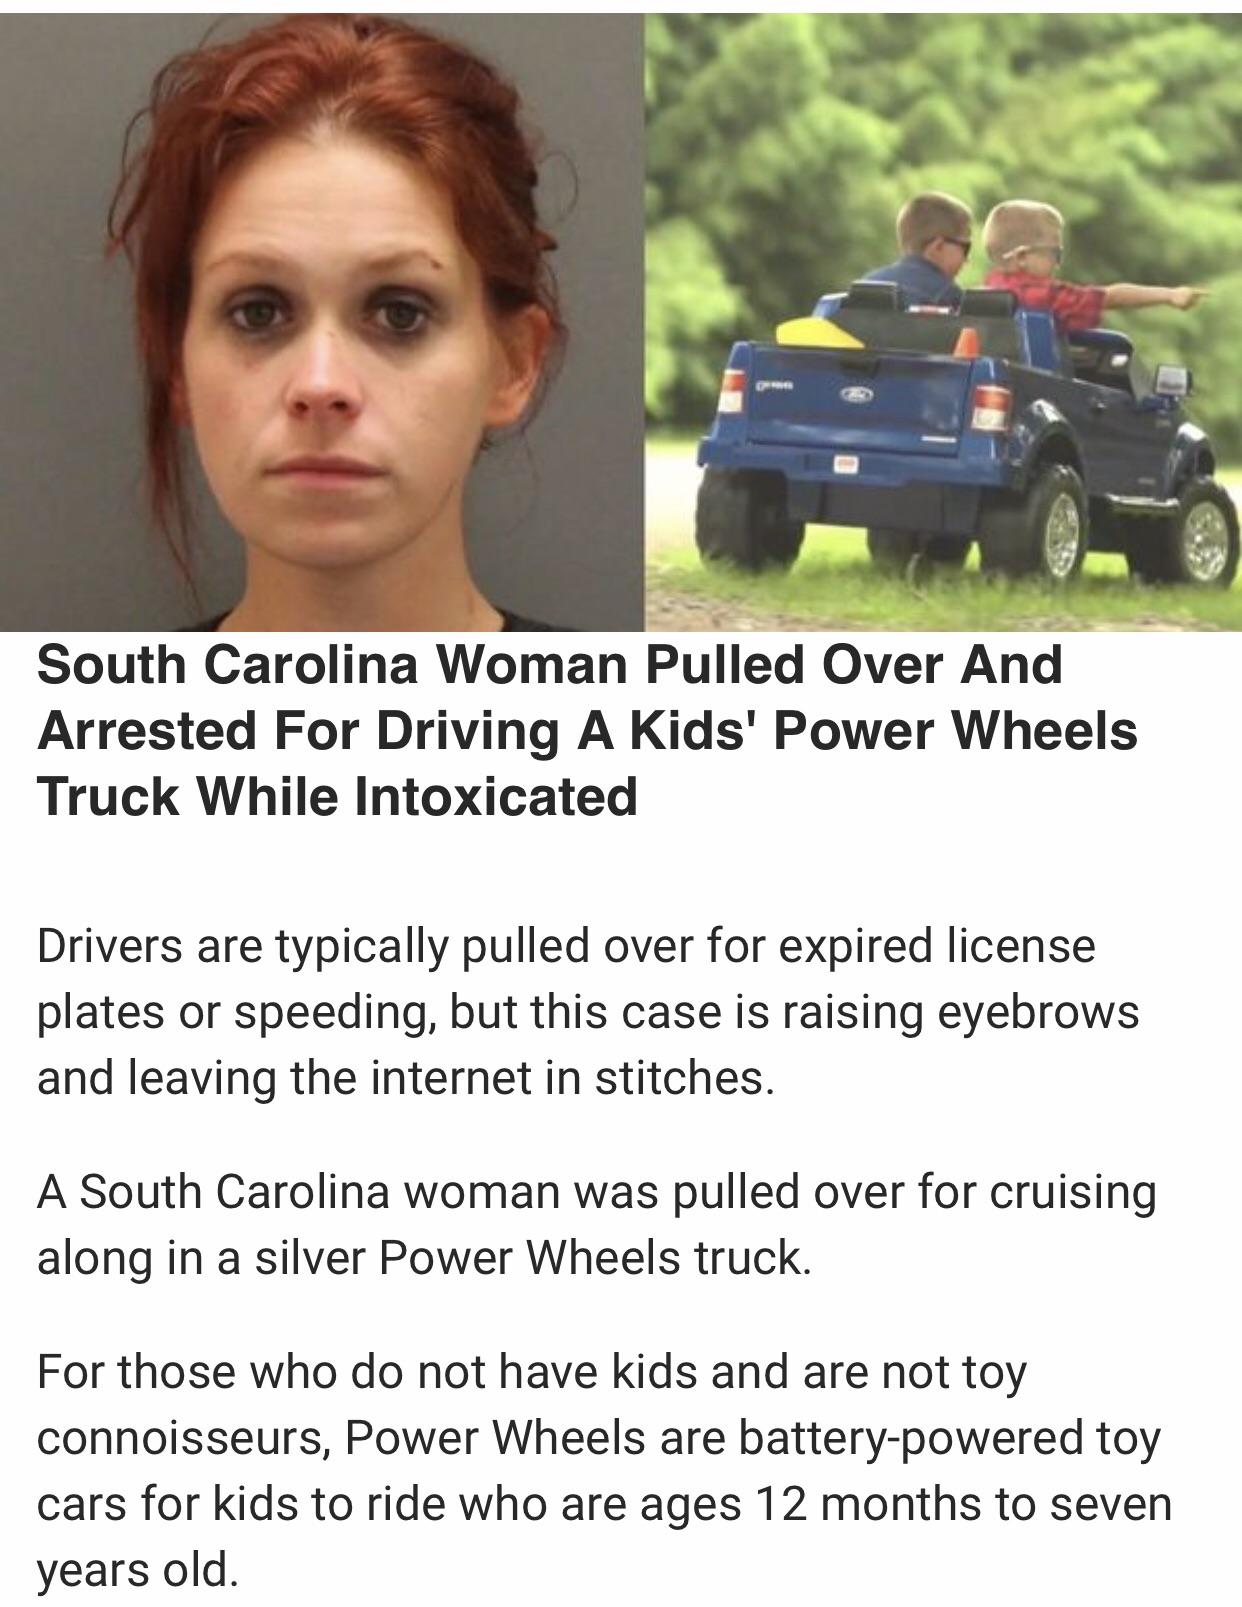 photo caption - South Carolina Woman Pulled Over And Arrested For Driving A Kids' Power Wheels Truck While Intoxicated Drivers are typically pulled over for expired license plates or speeding, but this case is raising eyebrows and leaving the internet in 